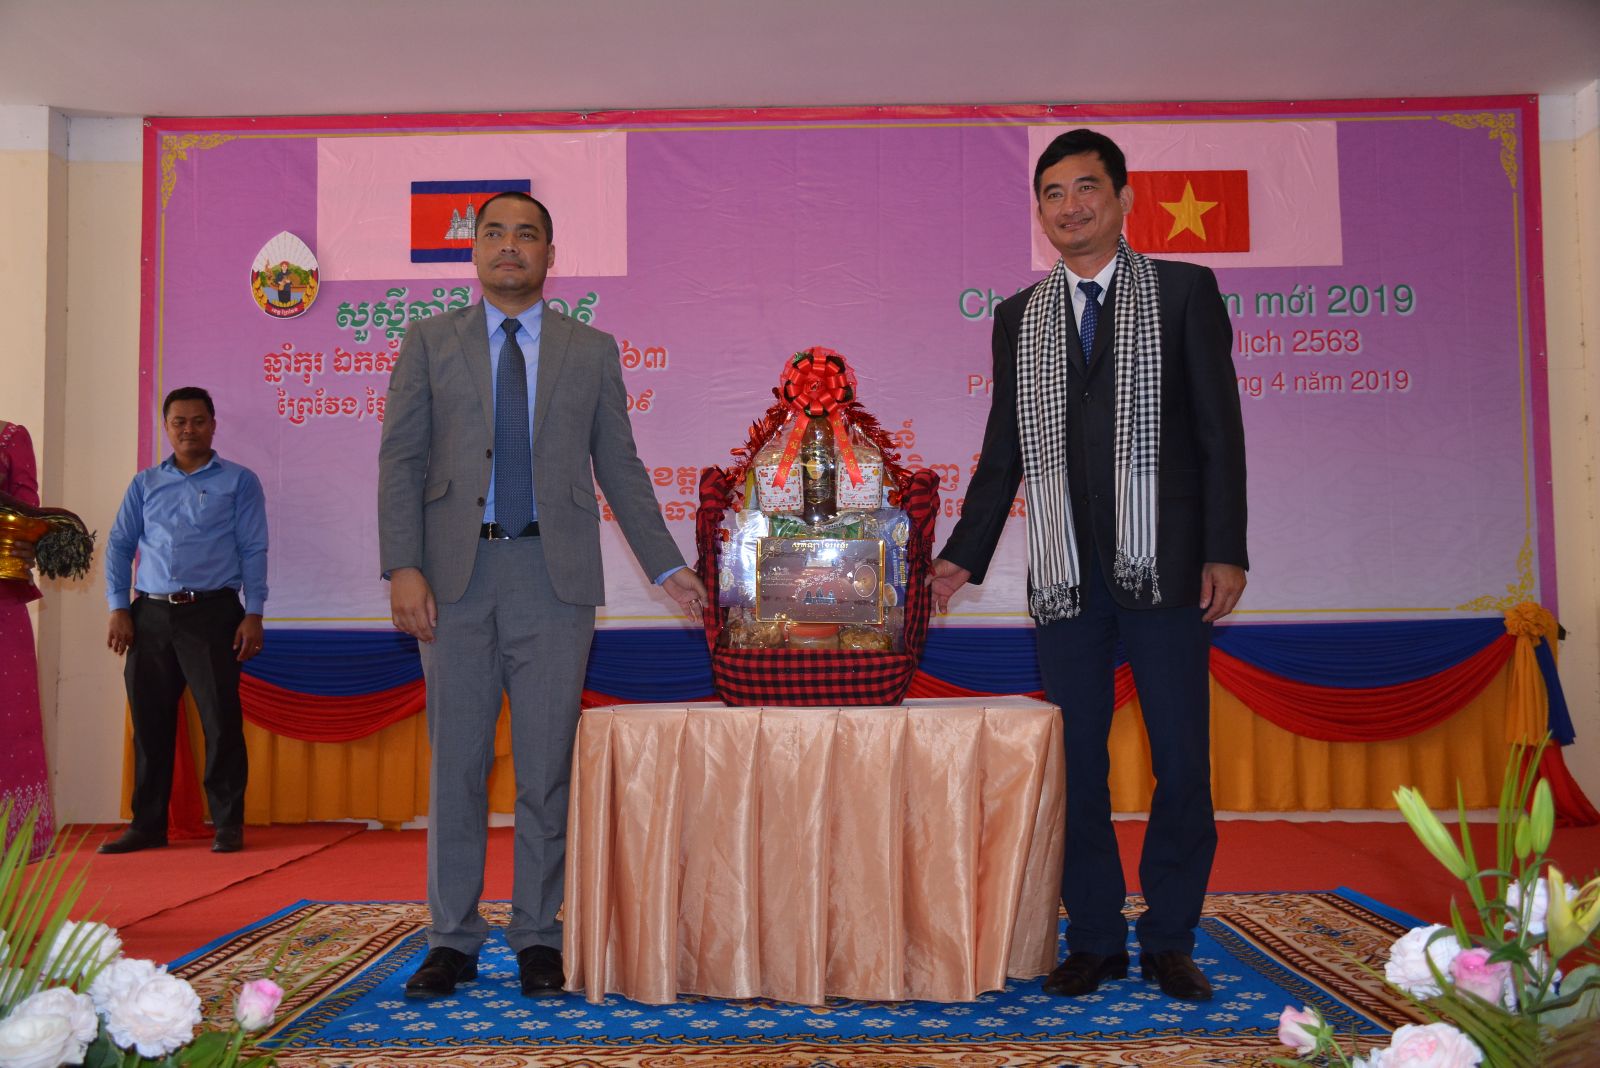 Vice Chairman of Long An Provincial People's Committee - Pham Van Canh (right) received gifts from the Governor of the Prey Veng provincial Administrative Department - Chea Somethi